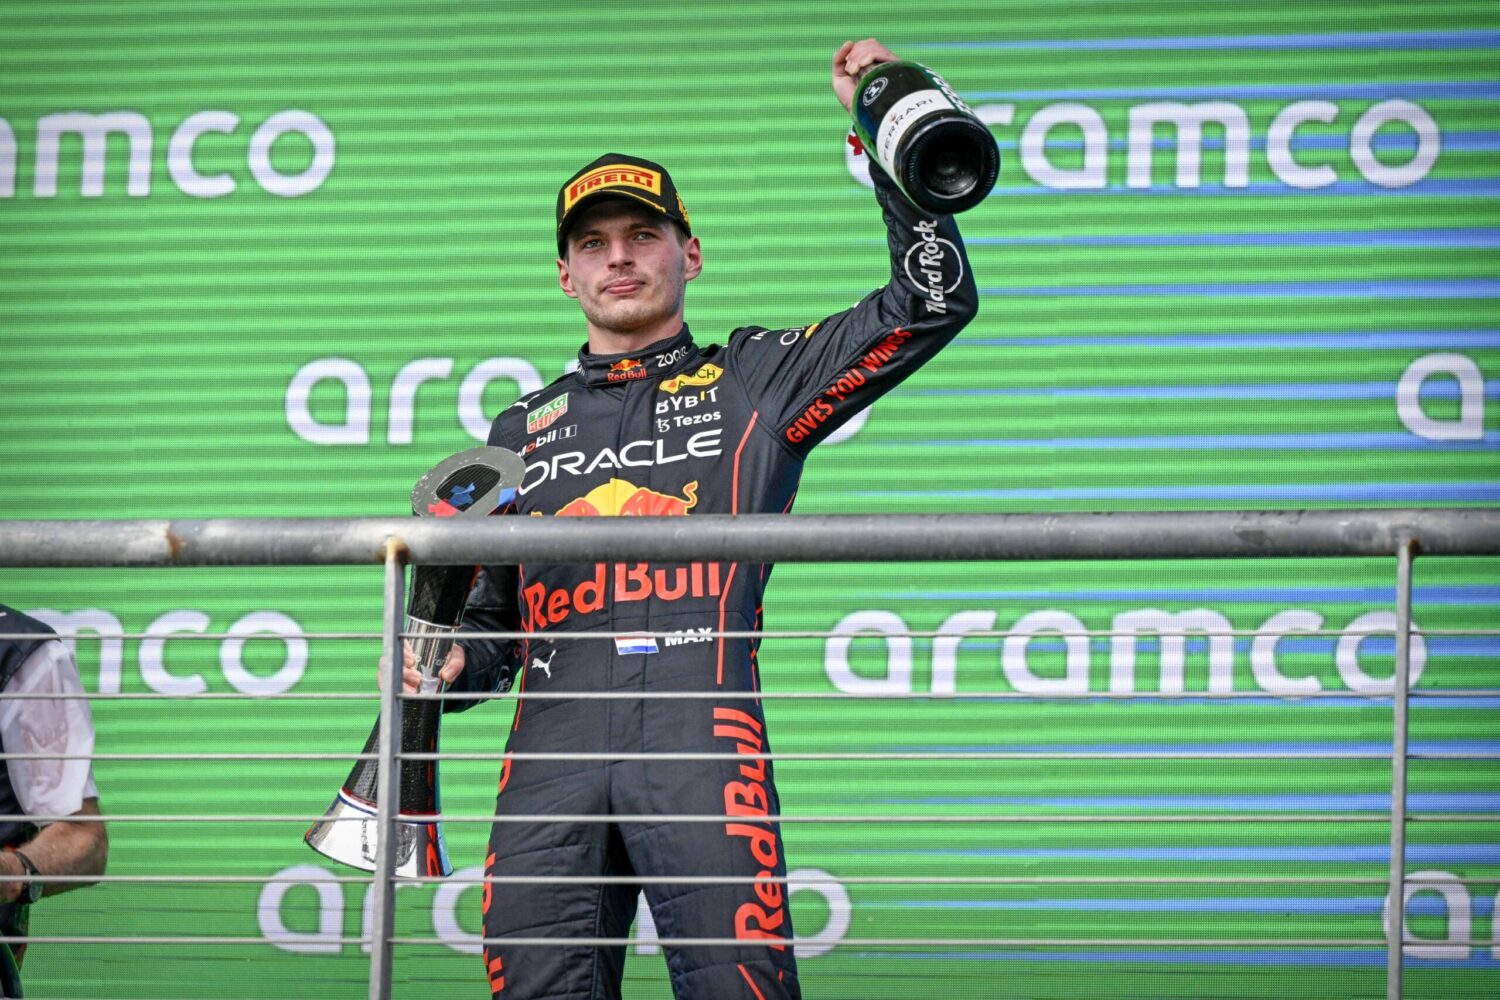 Red Bull Racing's Max Verstappen lifts a champagne bottle and trophy after winning the Formula 1 United States Grand Prix.